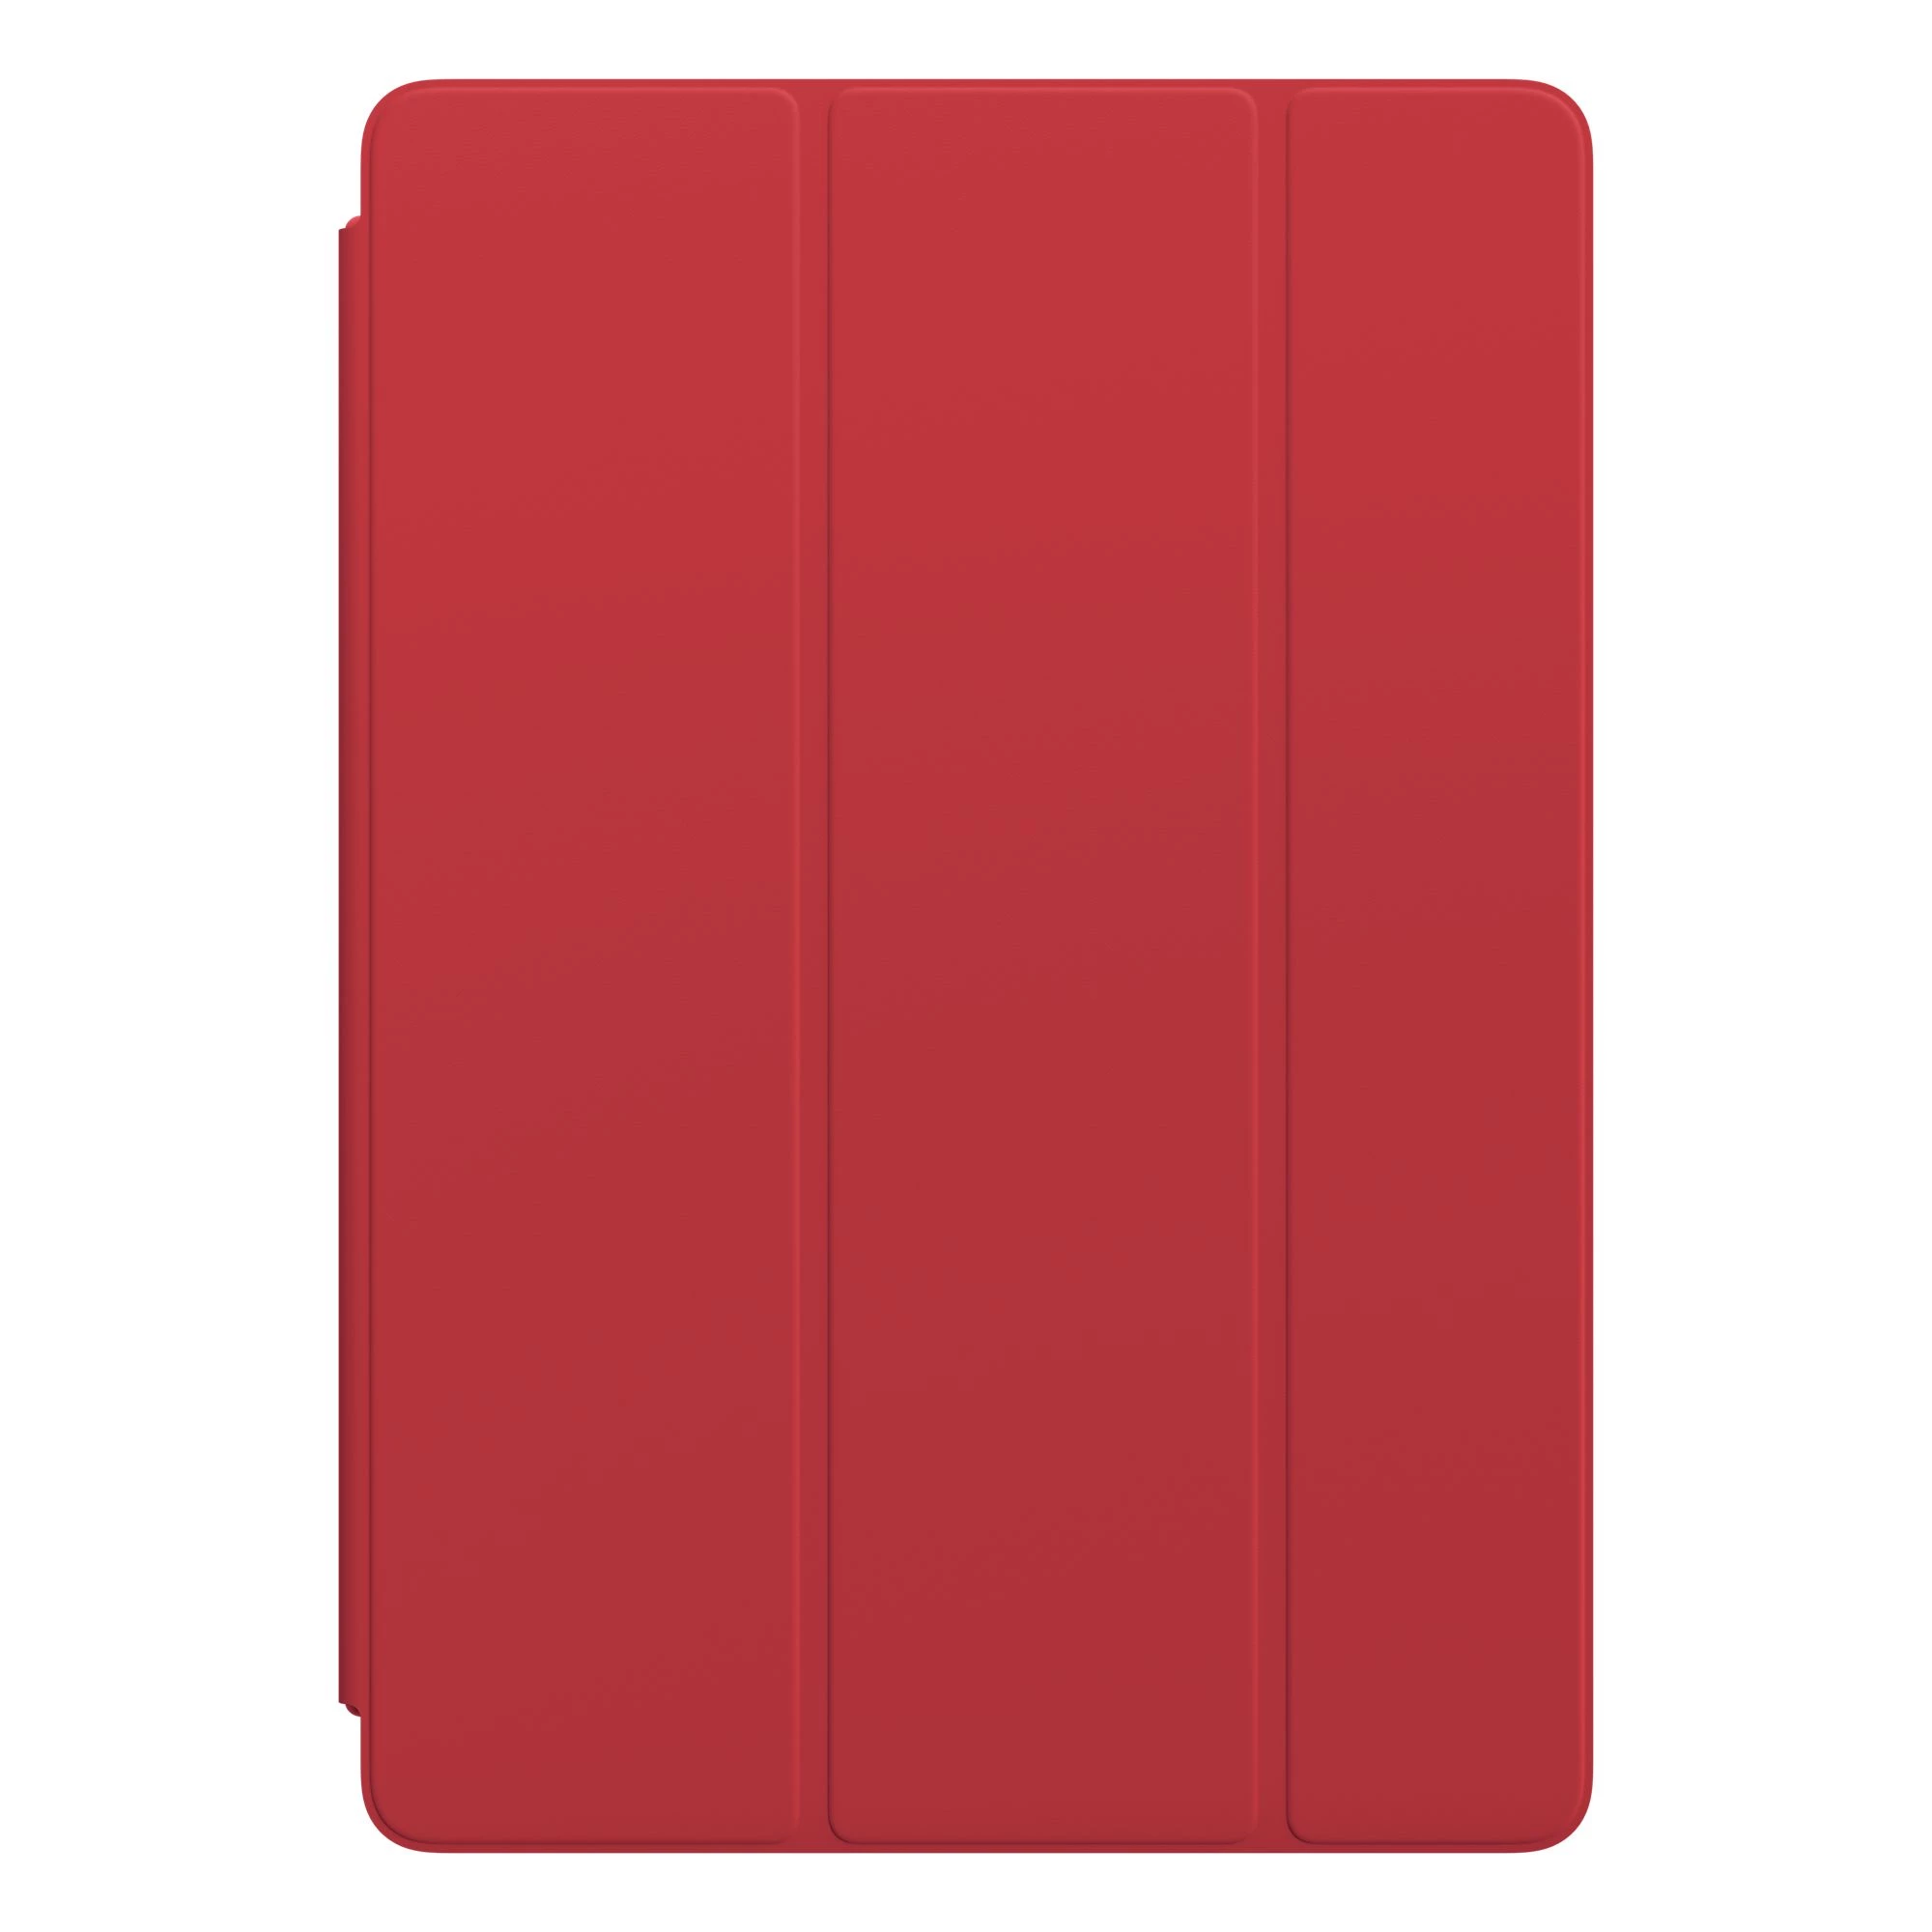 Apple Smart Cover for iPad 10.2"/Air 3/Pro 10.5" - PRODUCT RED (MR592)